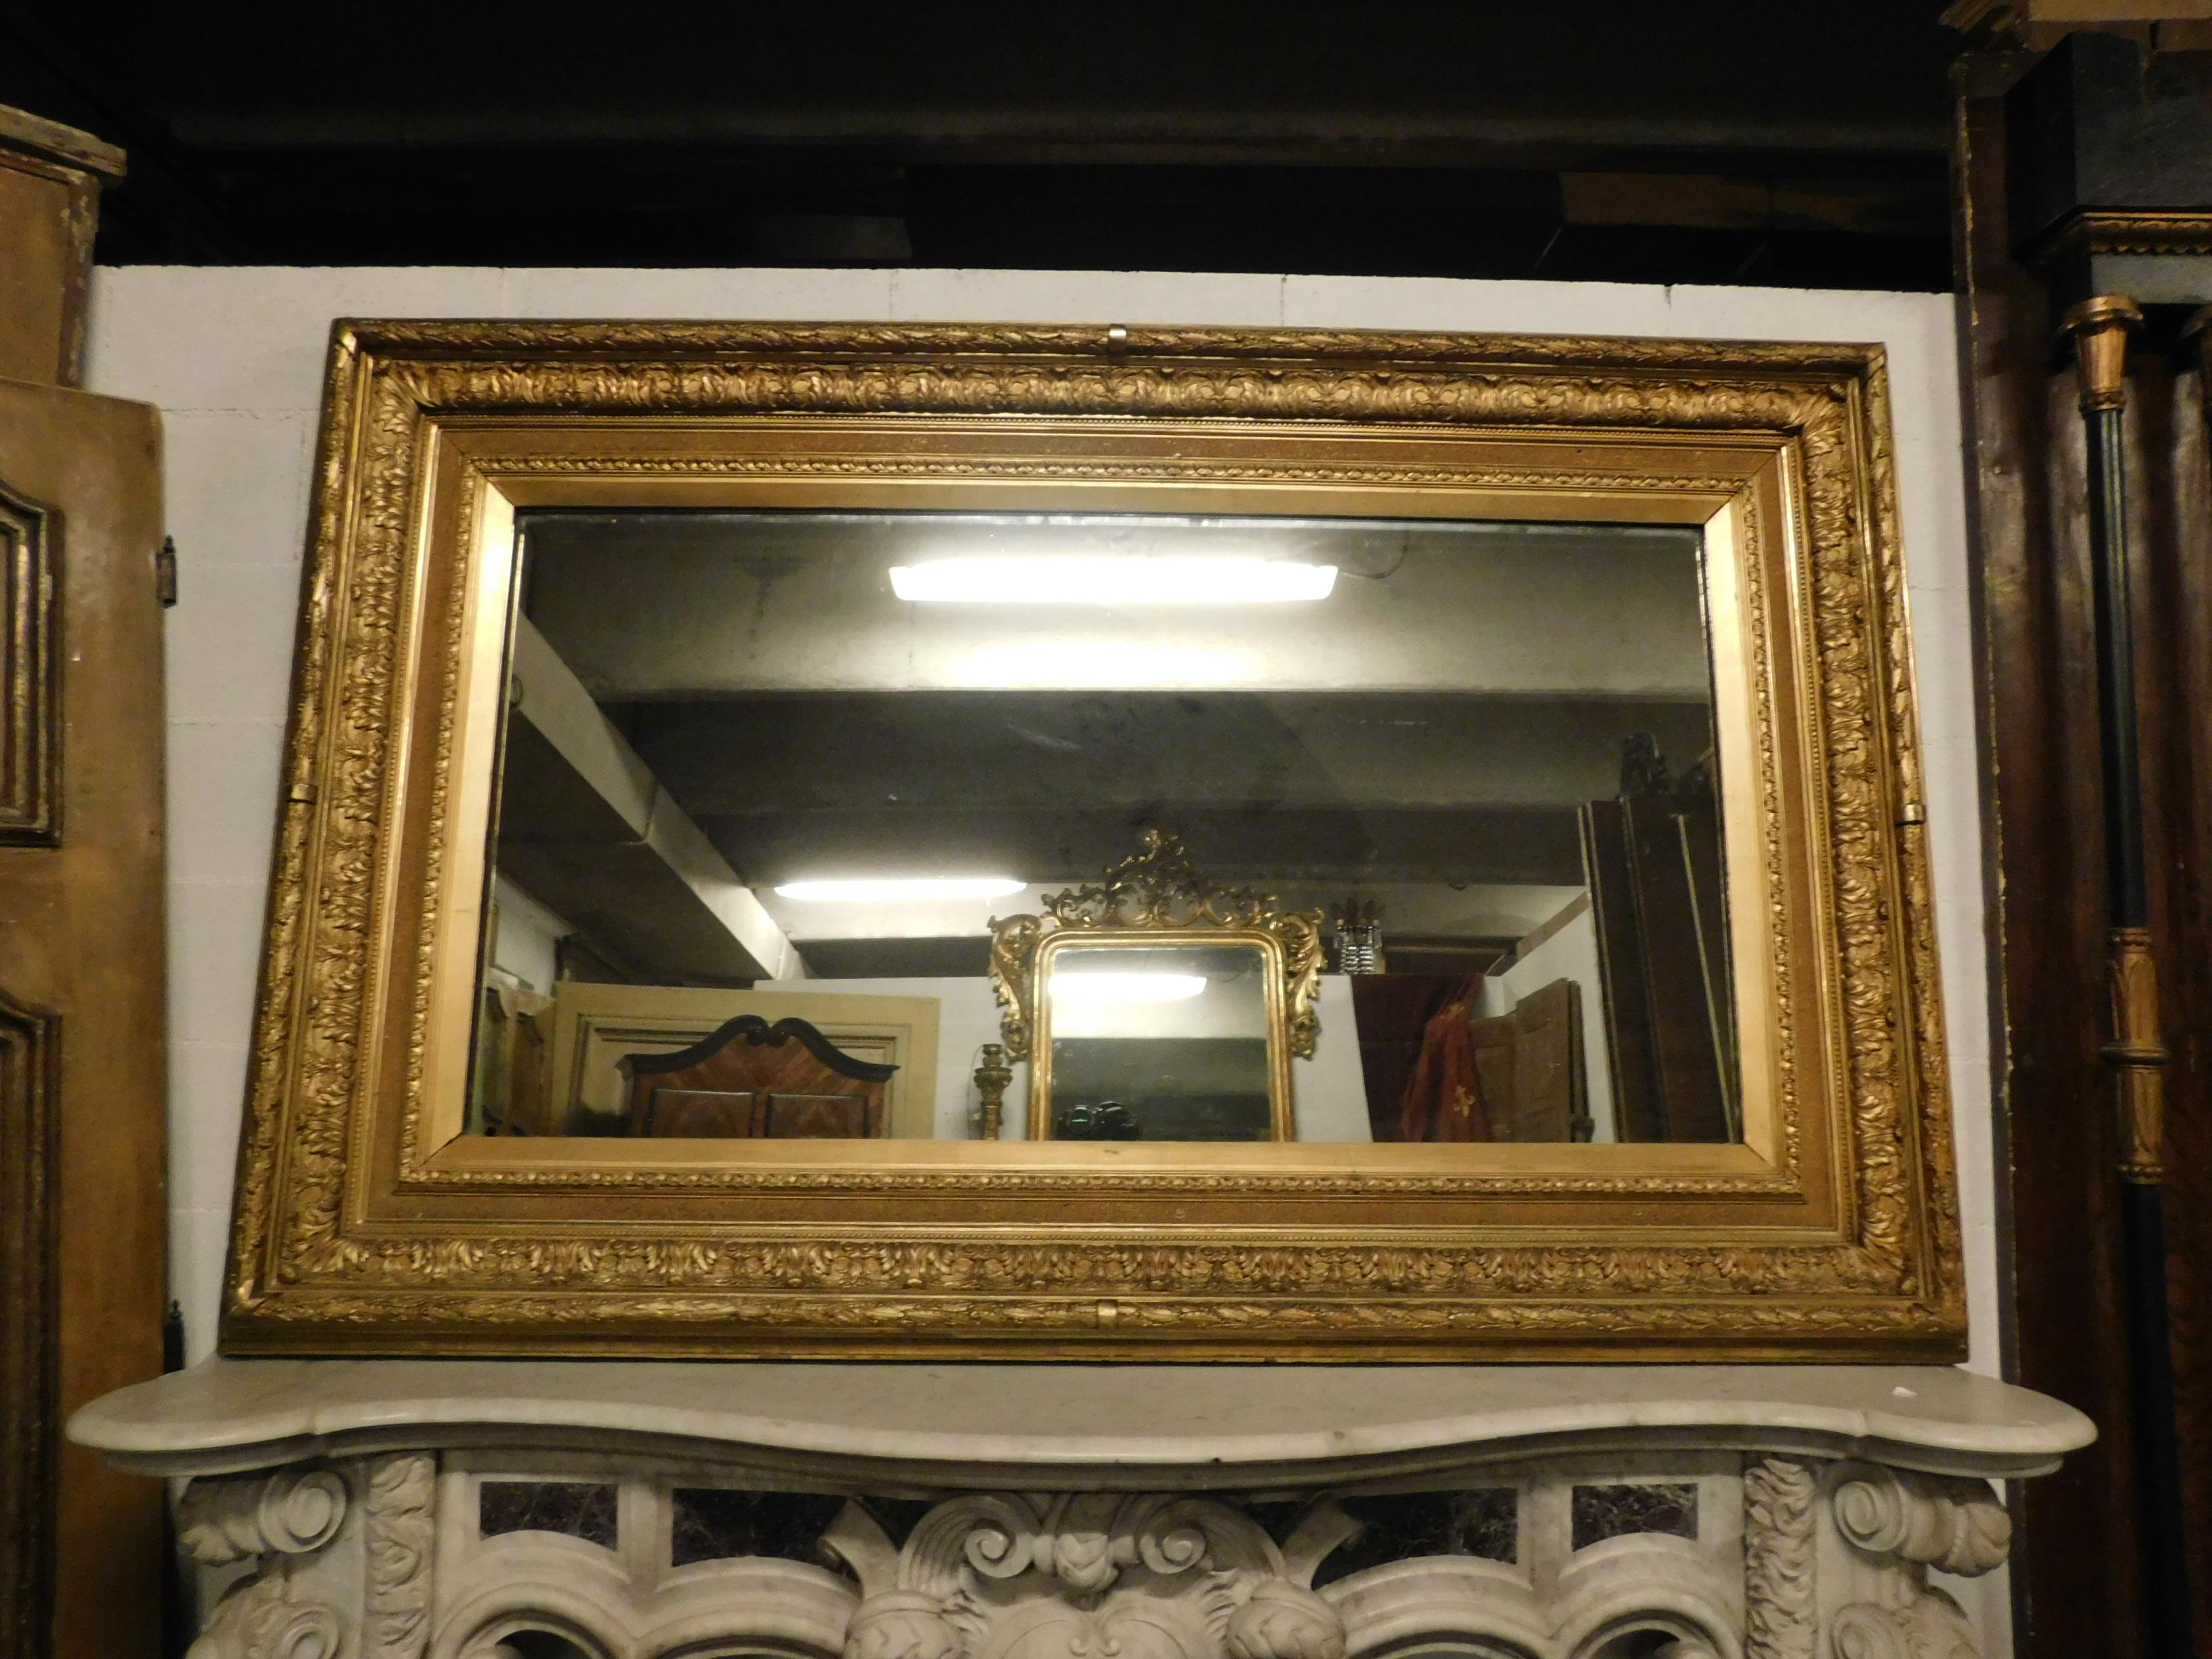 19th century antique gilded mirror with floral sculptures, coming from an ancient Italian house
Measures: 195 x 122 x 14.